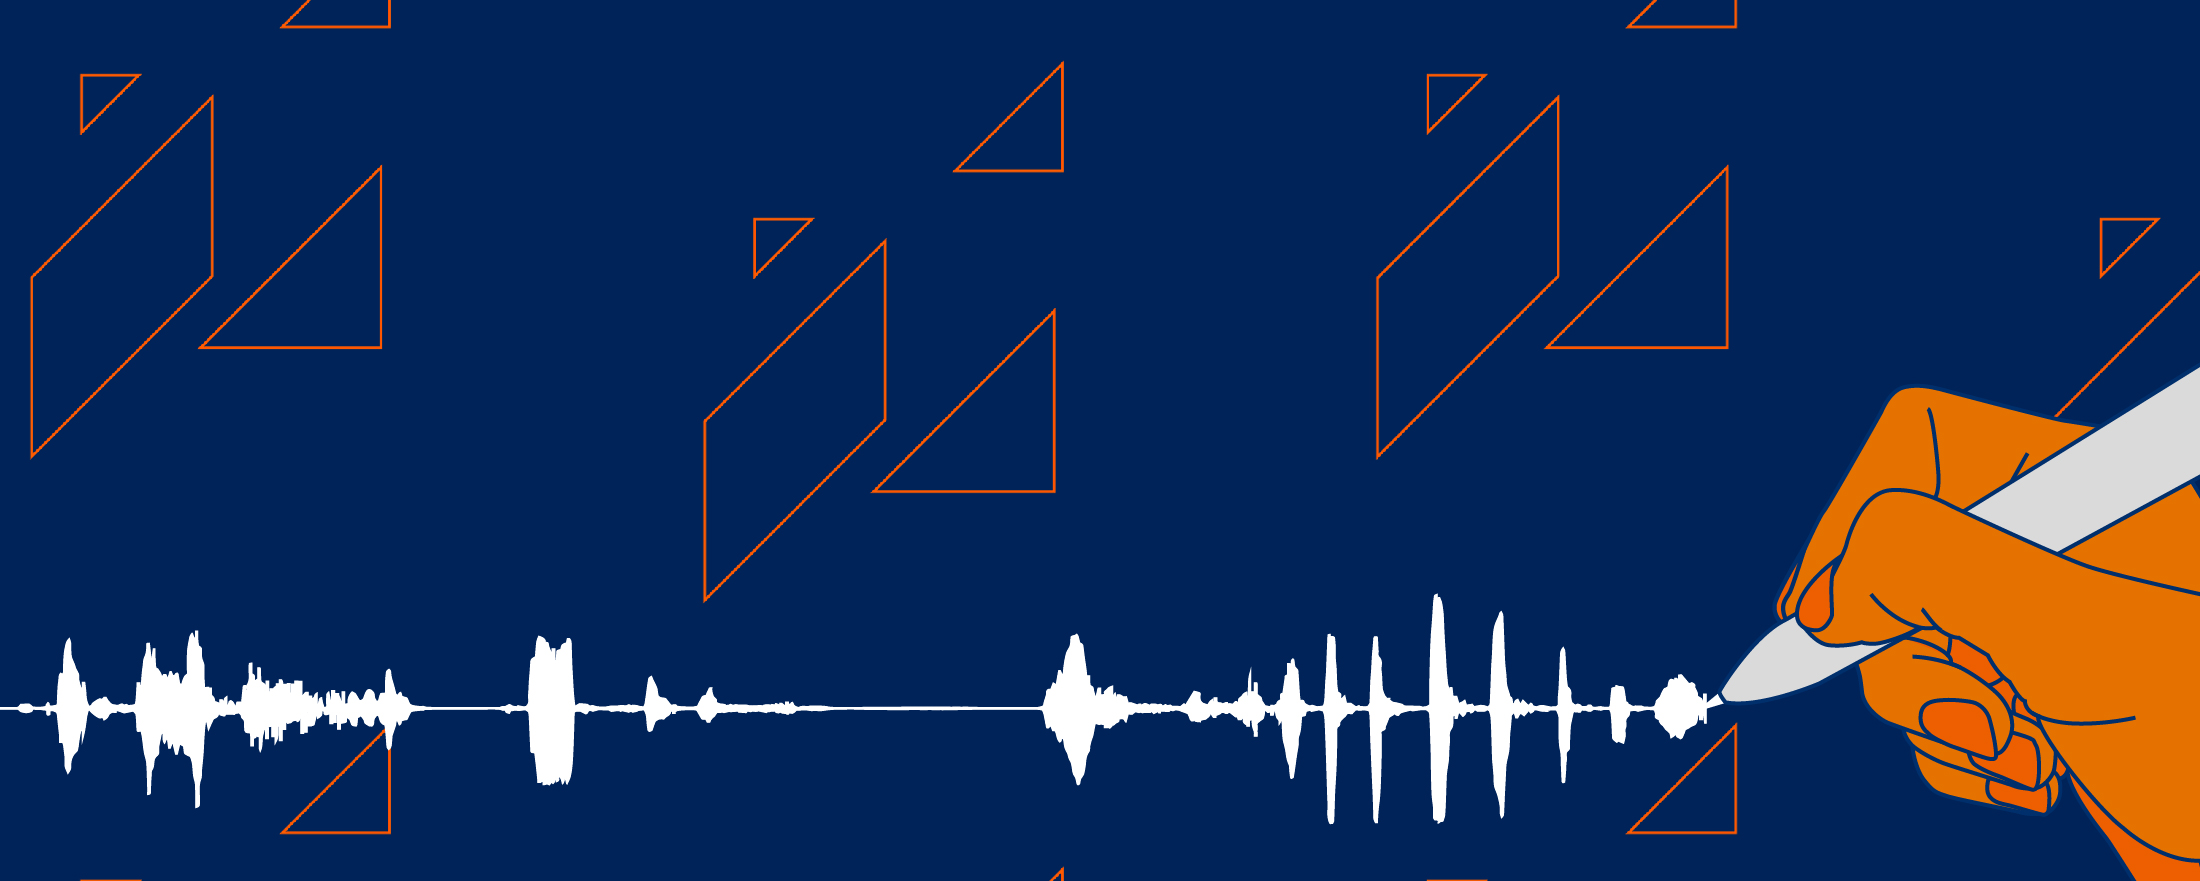 White Sound waves with orange outlined geometrical shapes around it